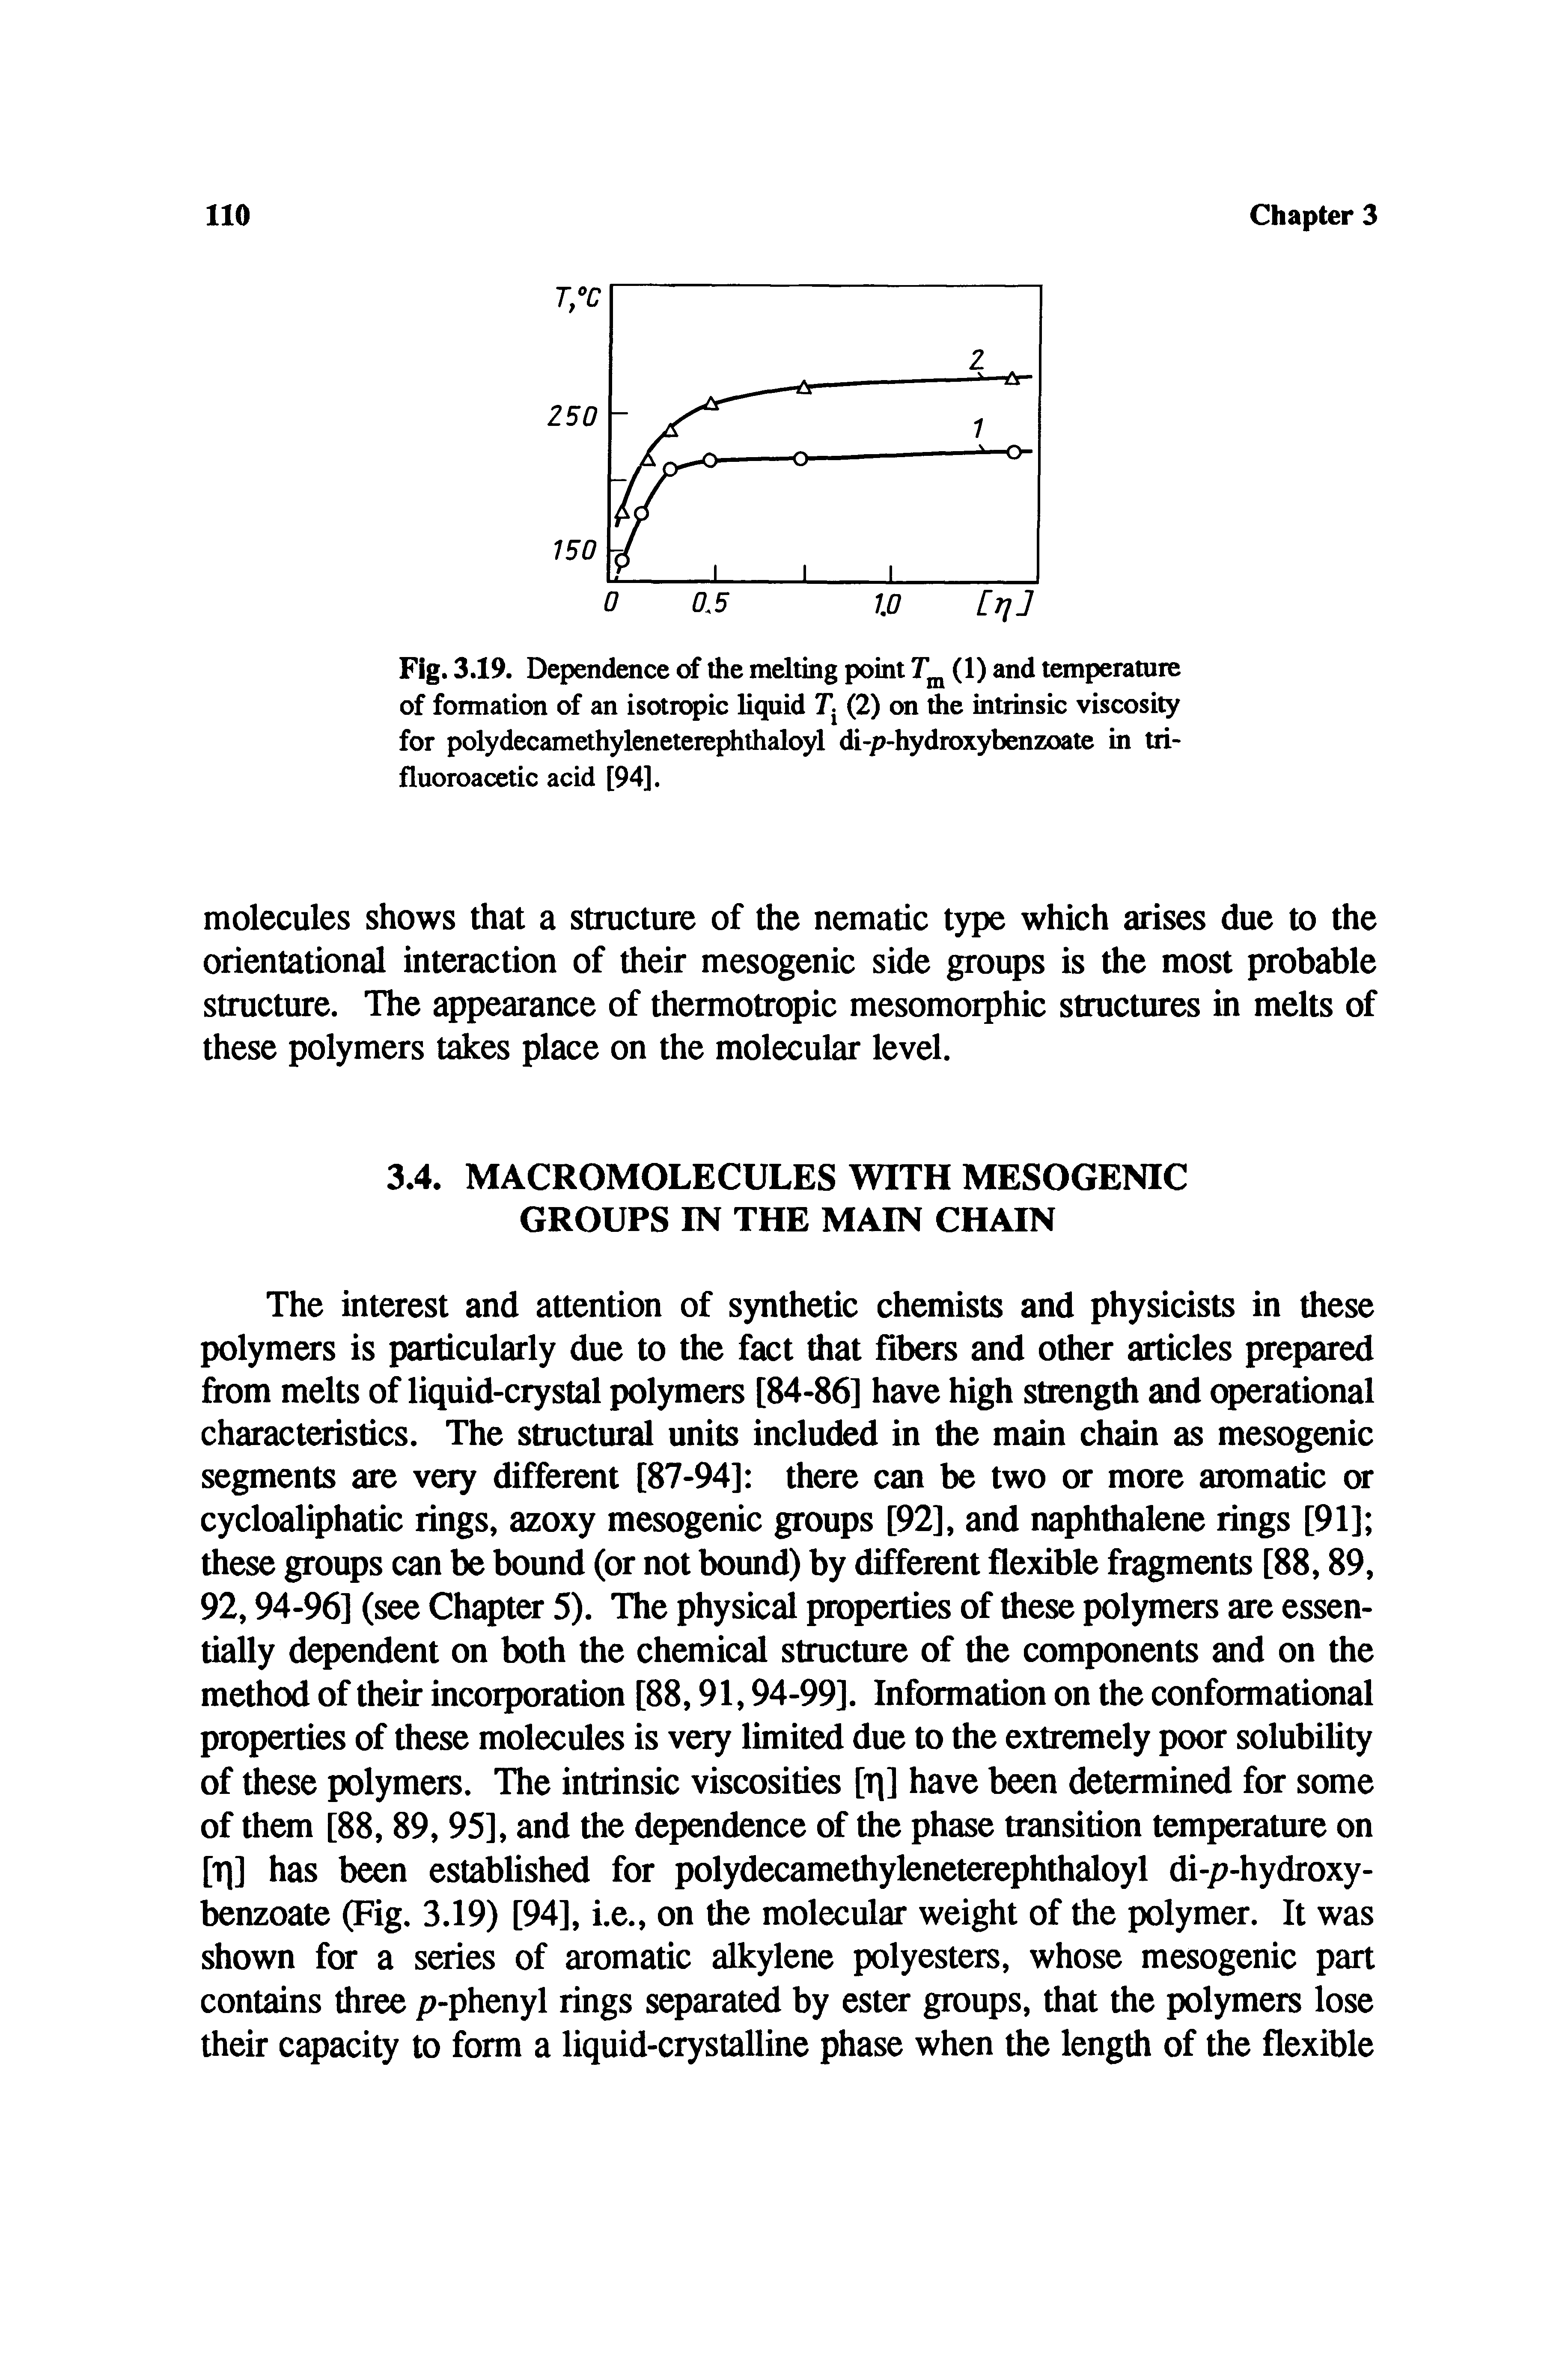 Fig. 3.19. Dependence of the melting point (1) and temperature of fonnation of an isotropic liquid T. (2) on the intrinsic viscosity for polydecamethyleneterephthaloyl di-p-hydroxybenzoate in tri-fluoroacetic acid [94].